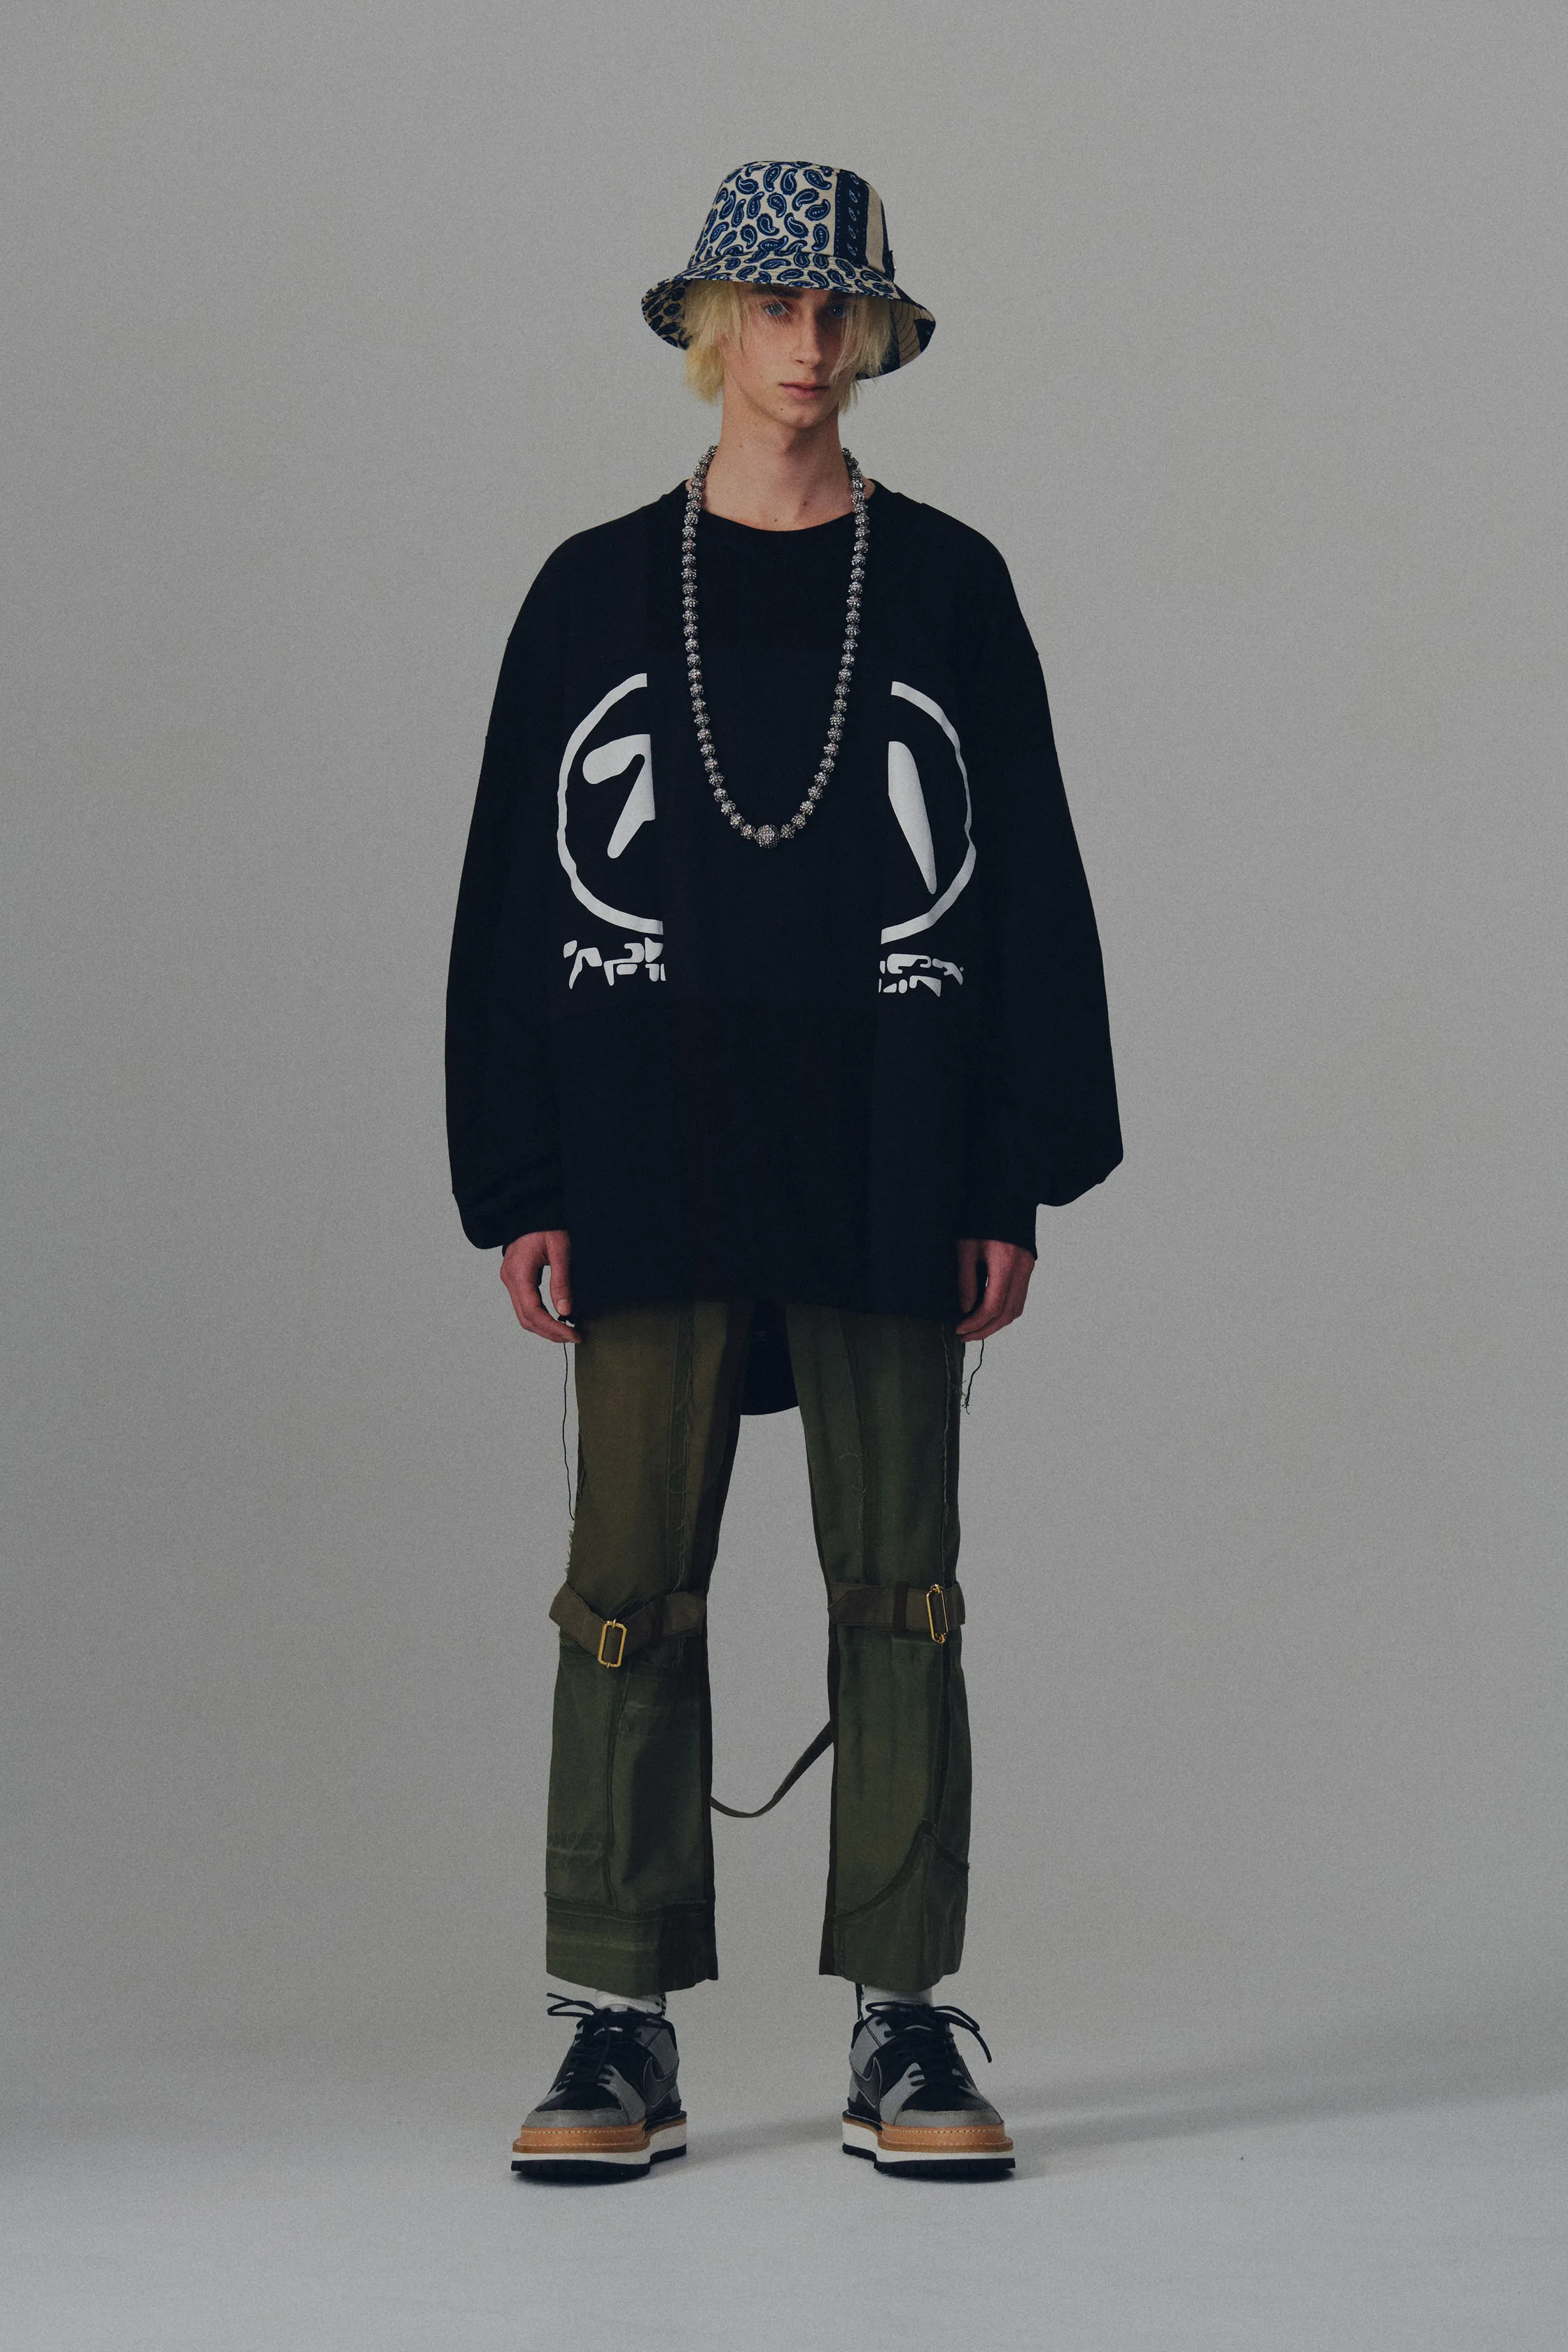 00021-Children-of-the-Discordance-Mens-Fall-22-credit-brand.png